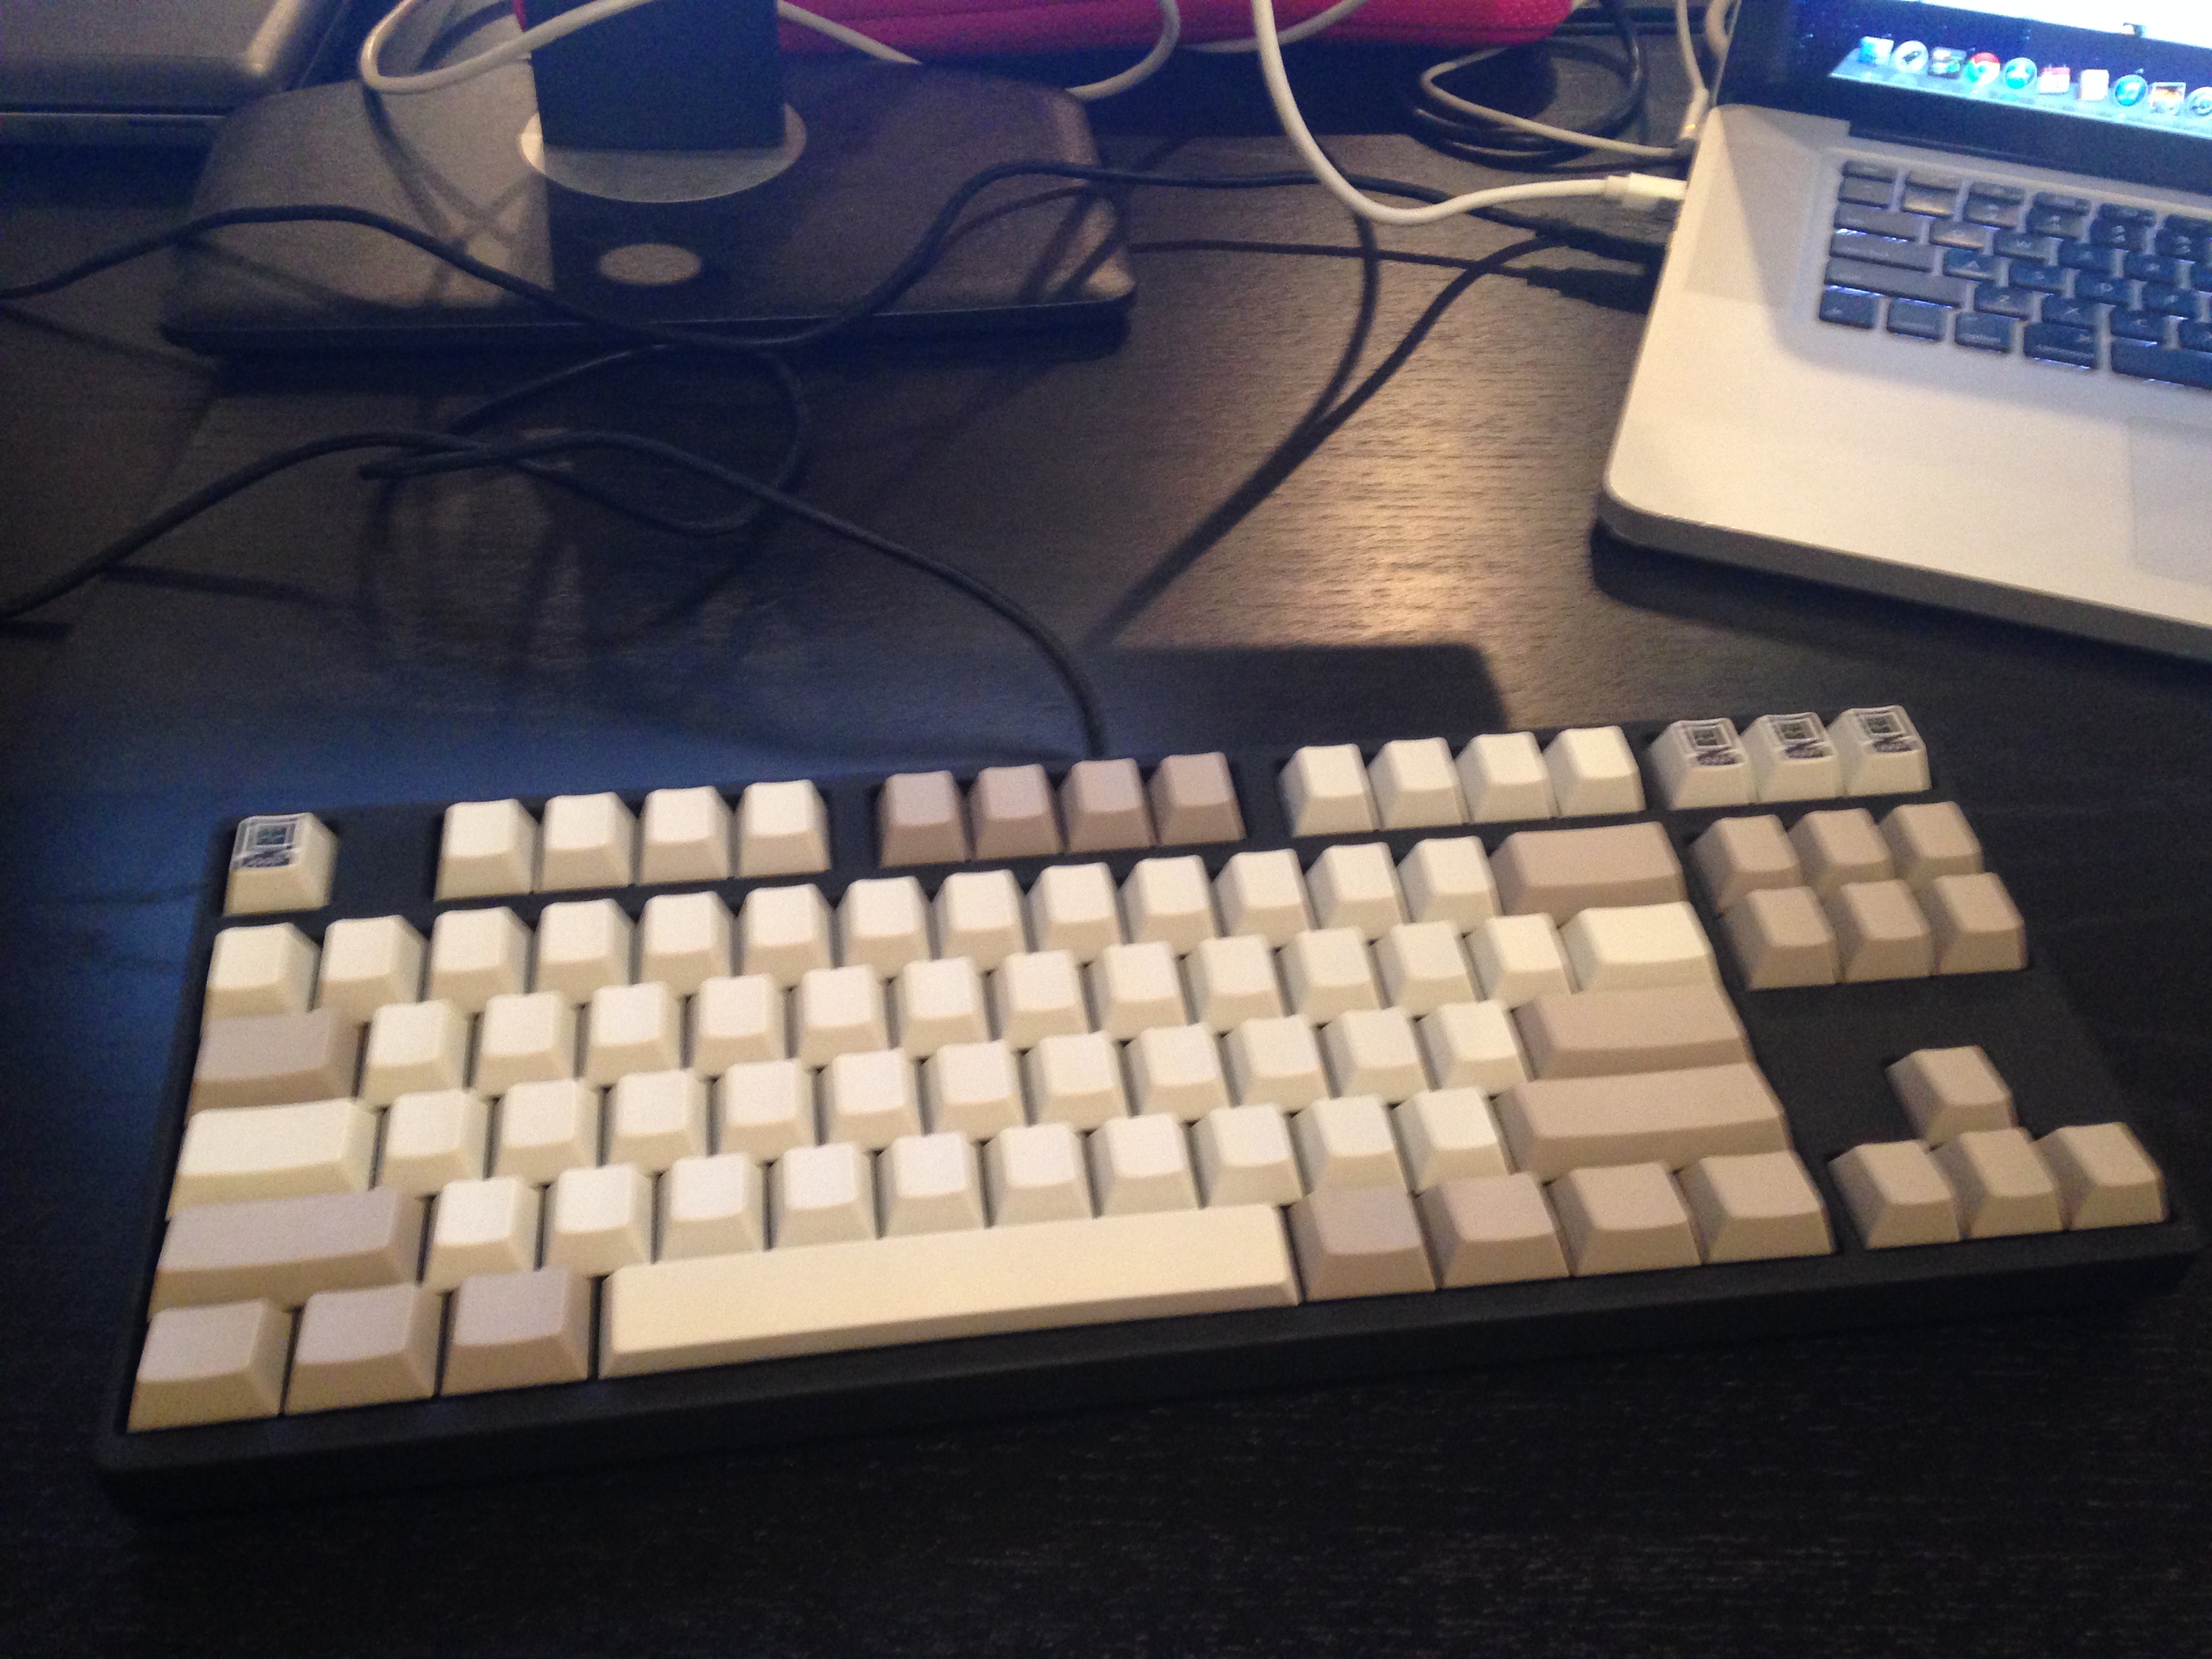 The keyboard I'm currently using